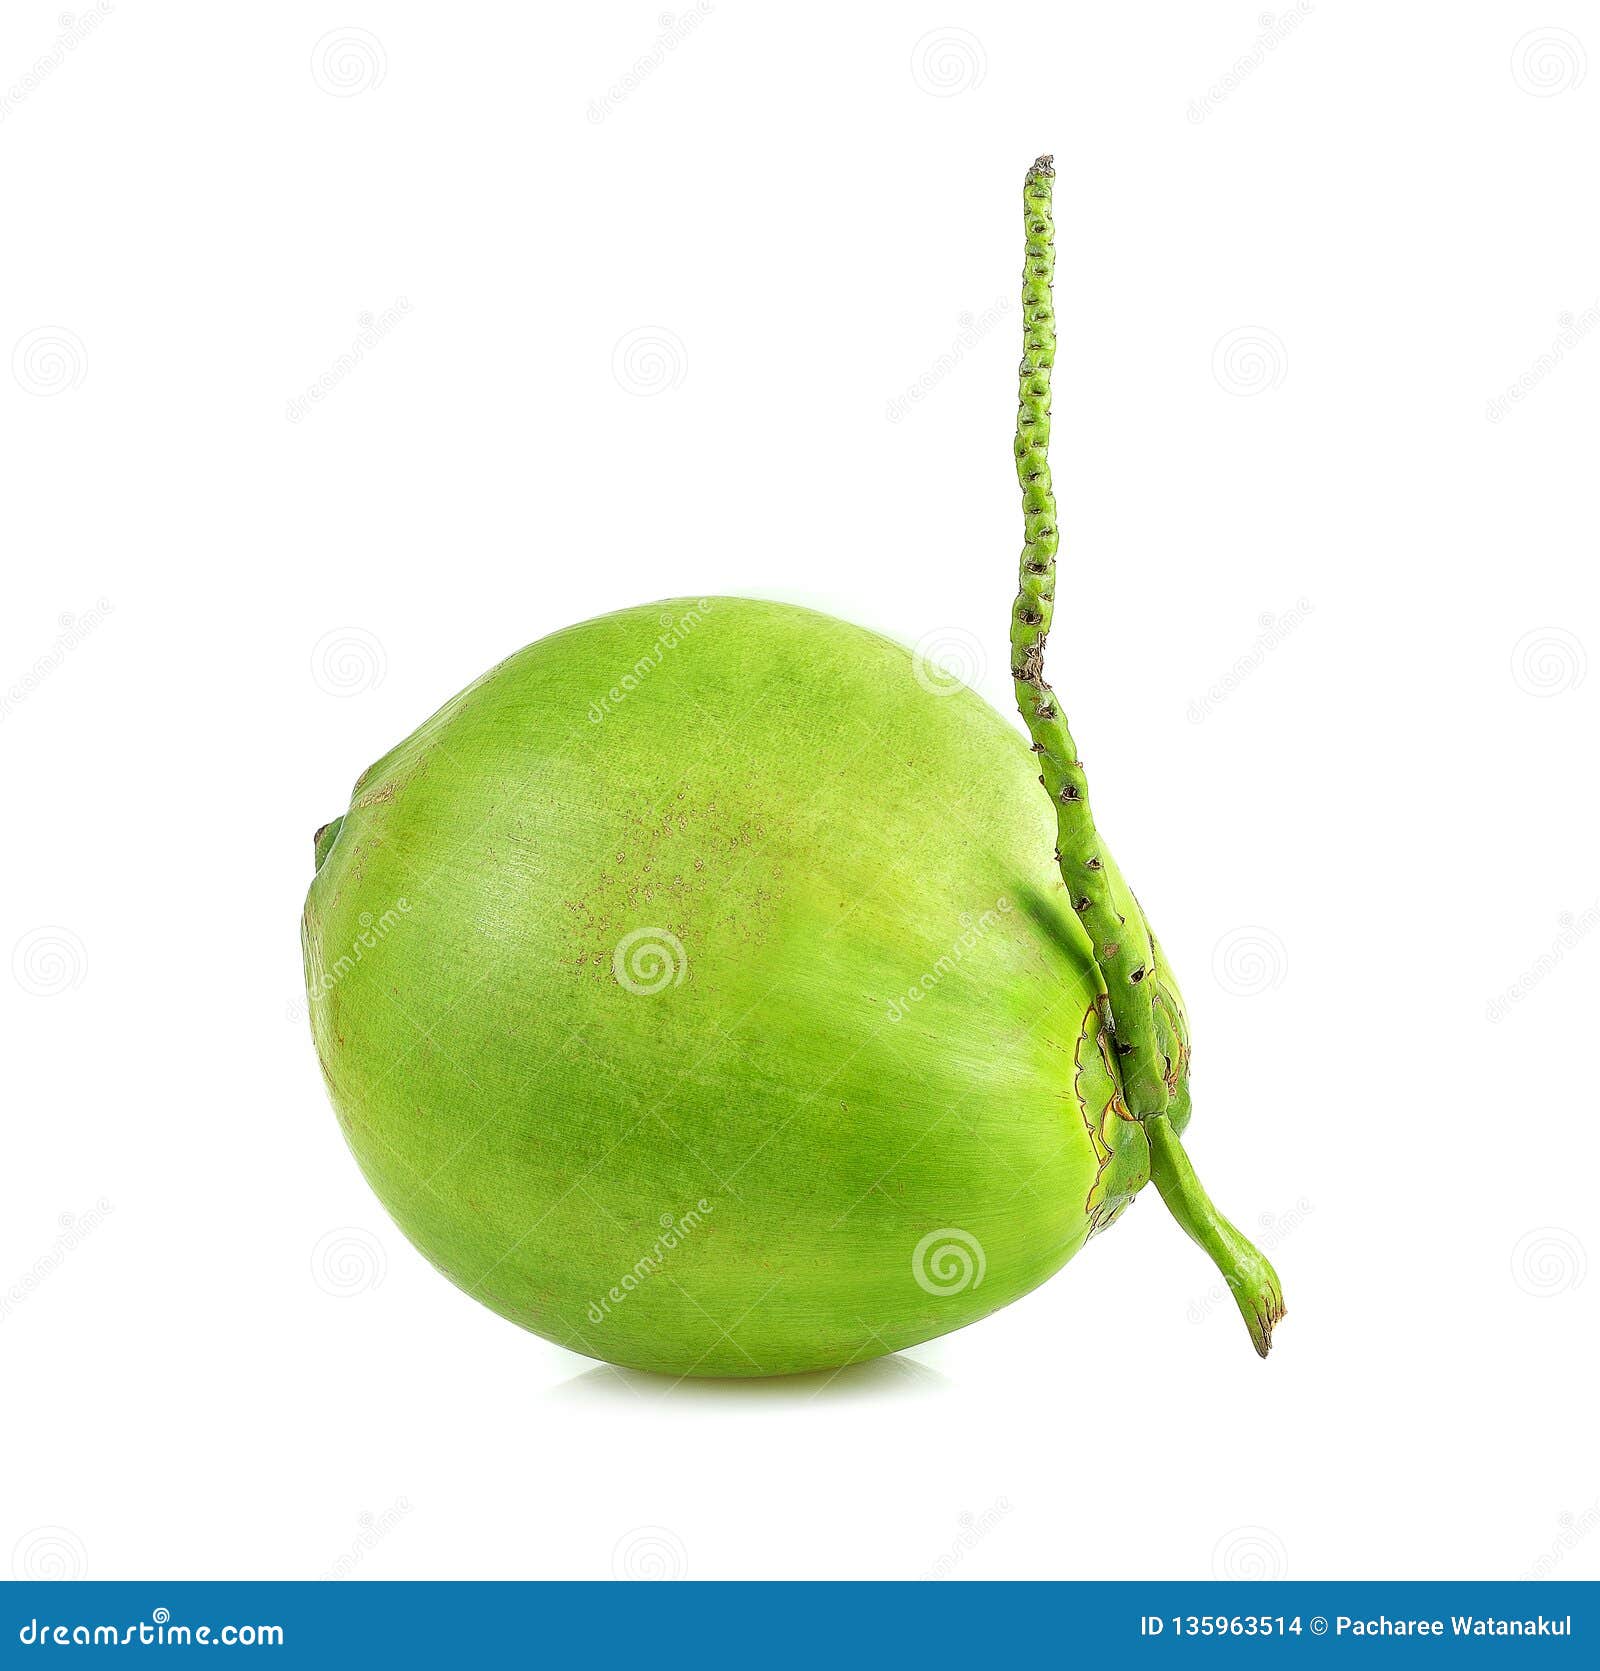 Coconut Fruits, Green Coconut on White Background Stock Photo - Image ...